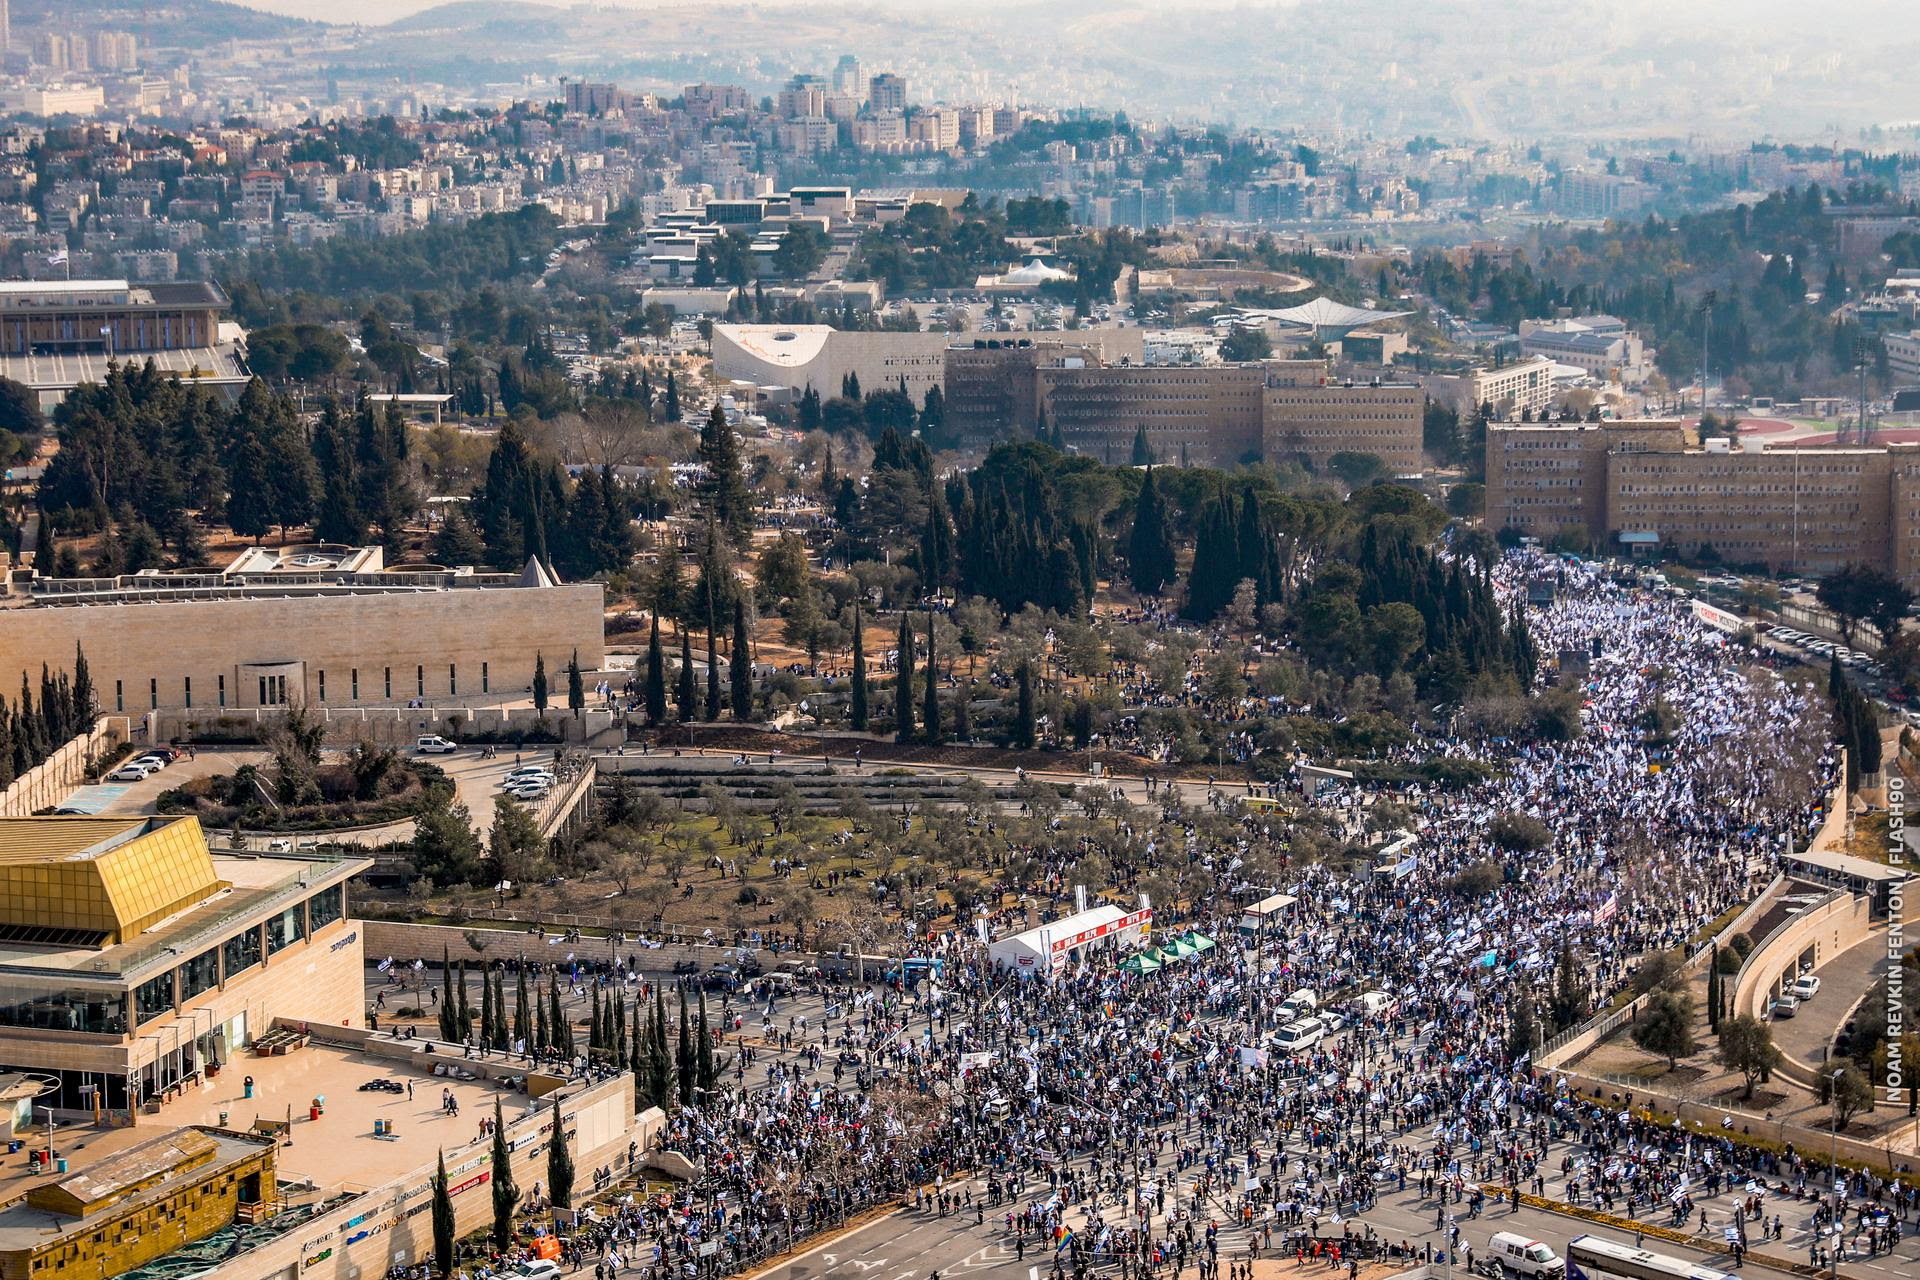 Israel Wrestles with Democracy – Israel at a Crossroads (Part 3)